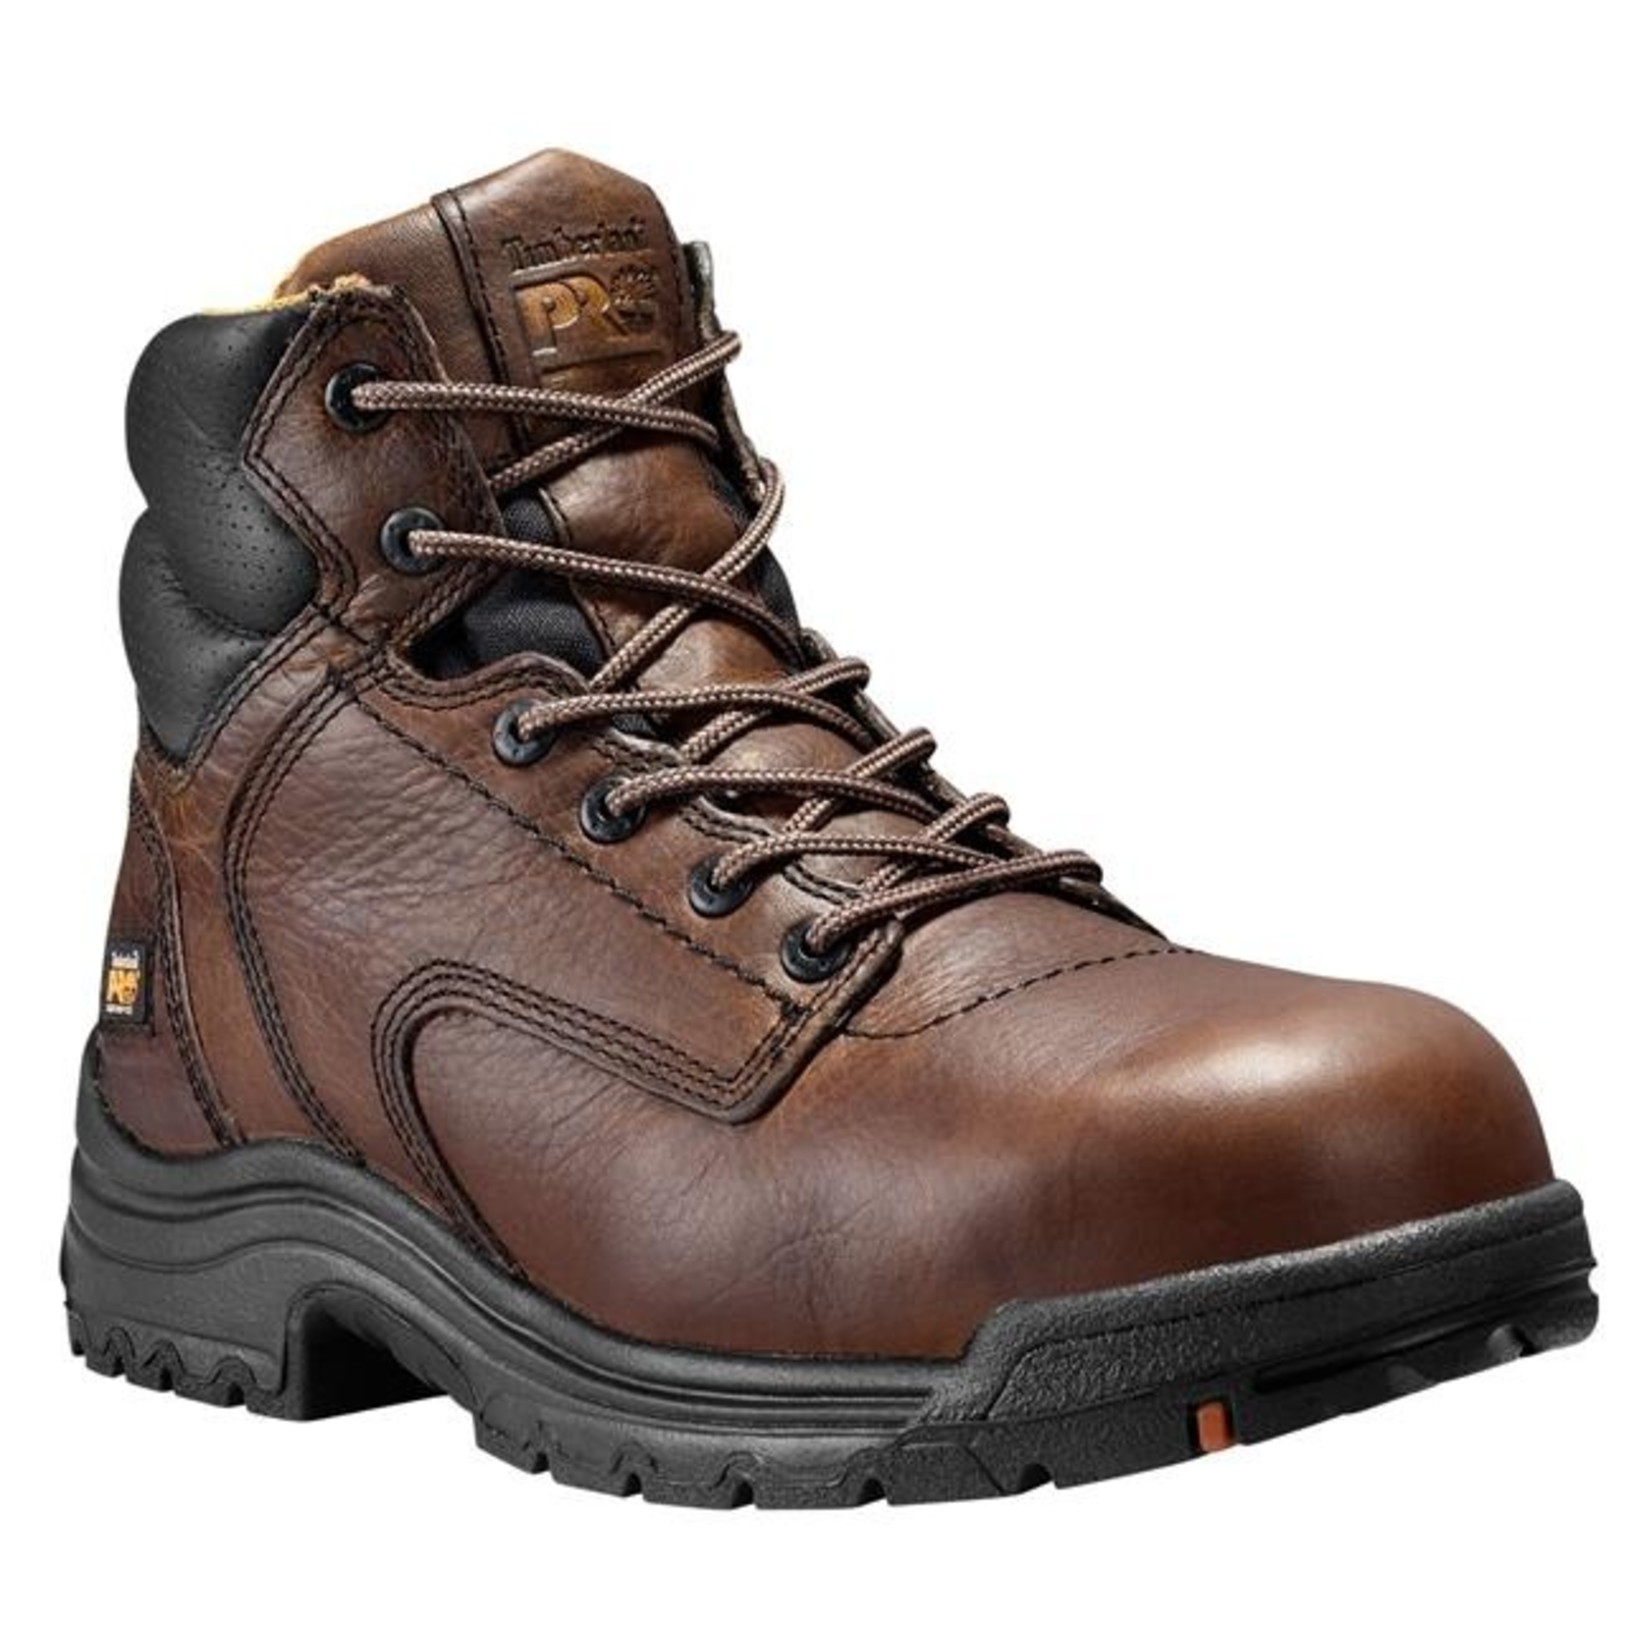 Timberland Timberland Pro 26063 Titan 6” Class 75/75 EH Men’s Composite Toe Safety Boots